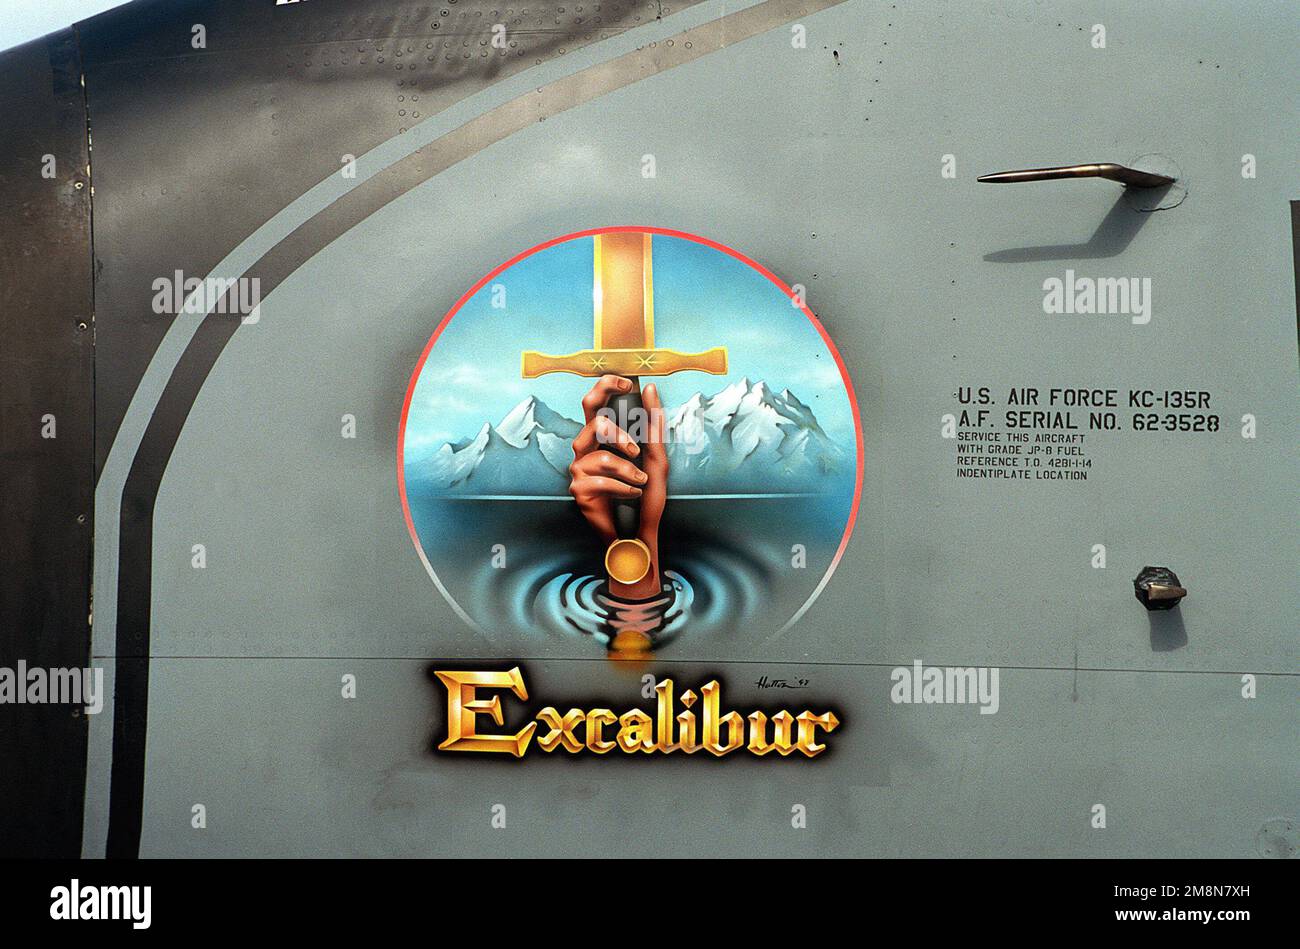 Suffolk County, England. 'Excalibur' nose art on a KC-135R Stratotanker aircraft, serial number 62-3528, assigned to the 100th Air Refueling Wing, Royal Air Force (RAF) Mildenhall. The artist is STAFF Sergeant Charles Hatton, assigned to the 100th Aircraft Generation Squadron. Base: Raf Mildenhall Country: Great Britain / England (GBR) Stock Photo